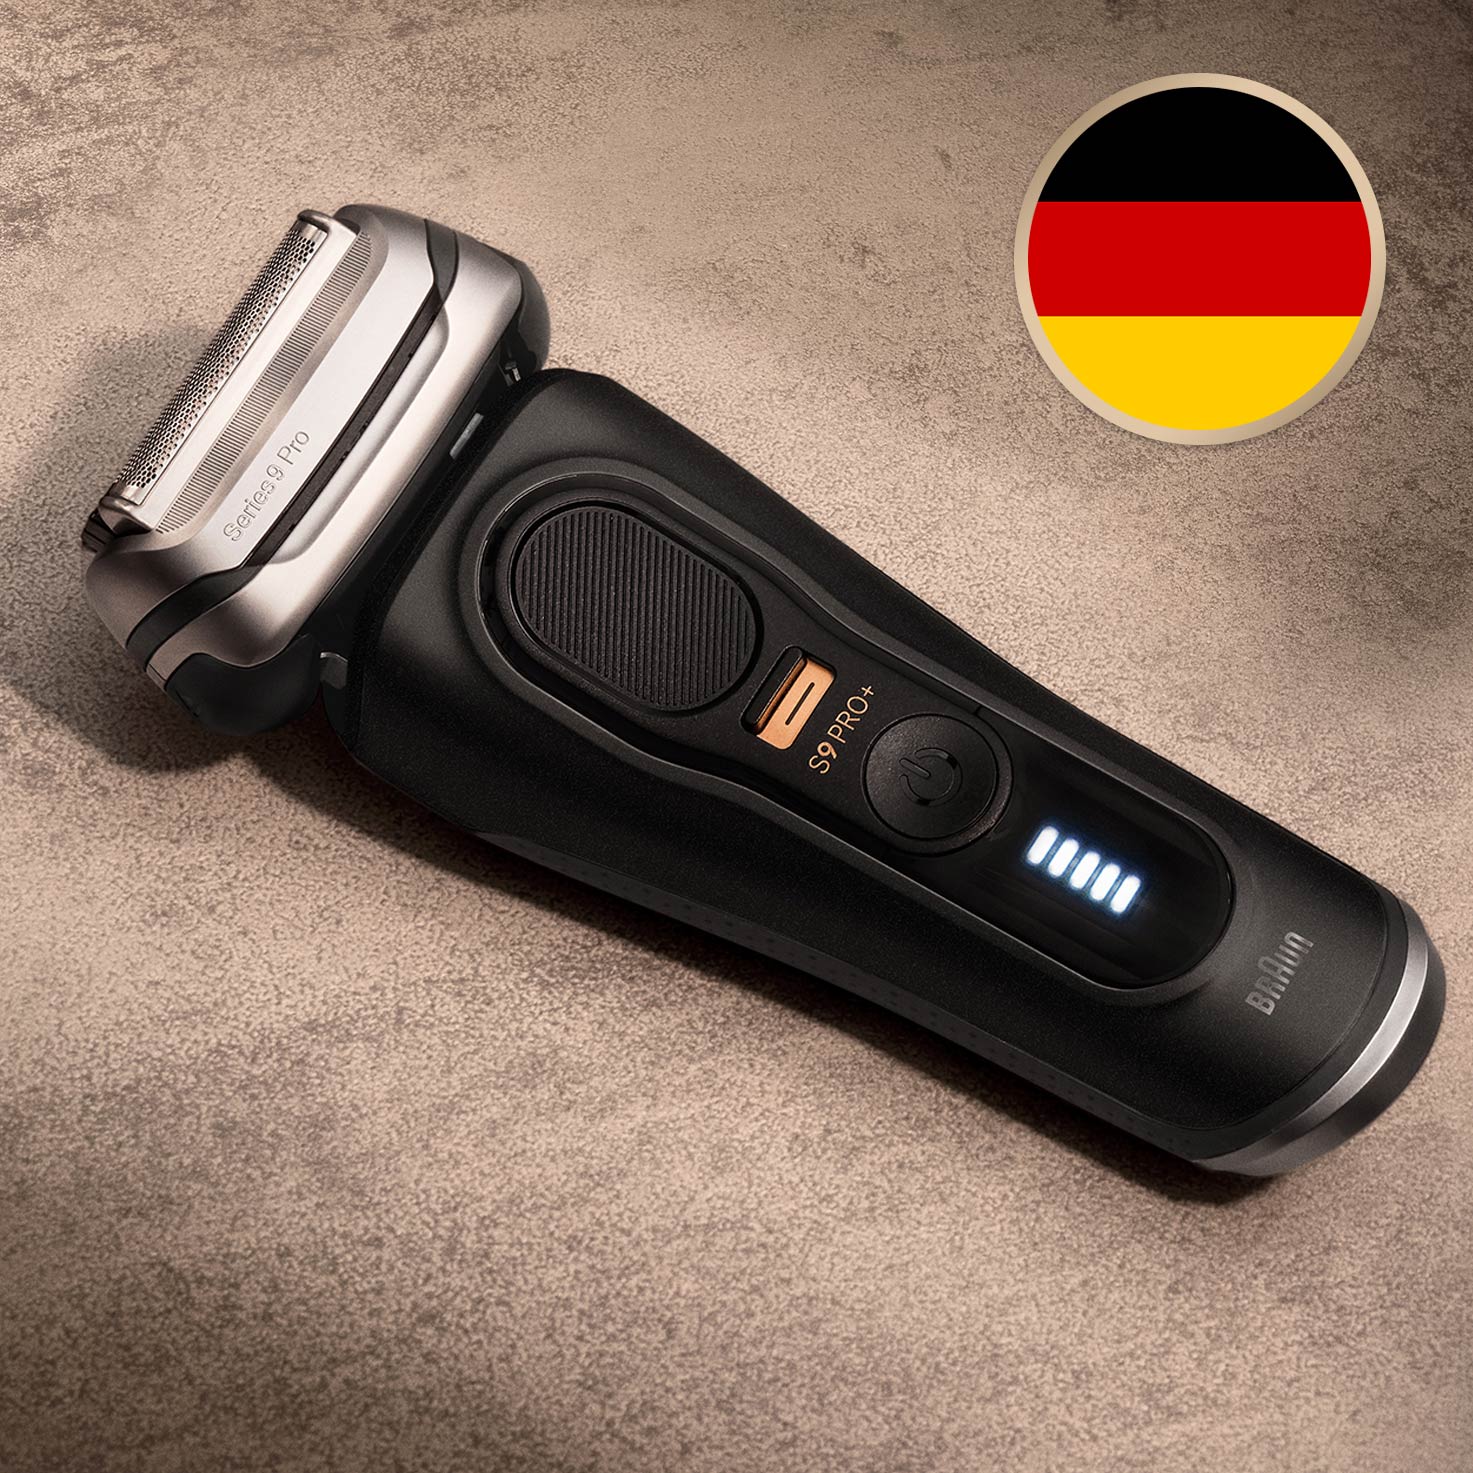 Series 9 Pro+ 9510s Wet & Dry shaver with charging stand and travel case,  atelier black.